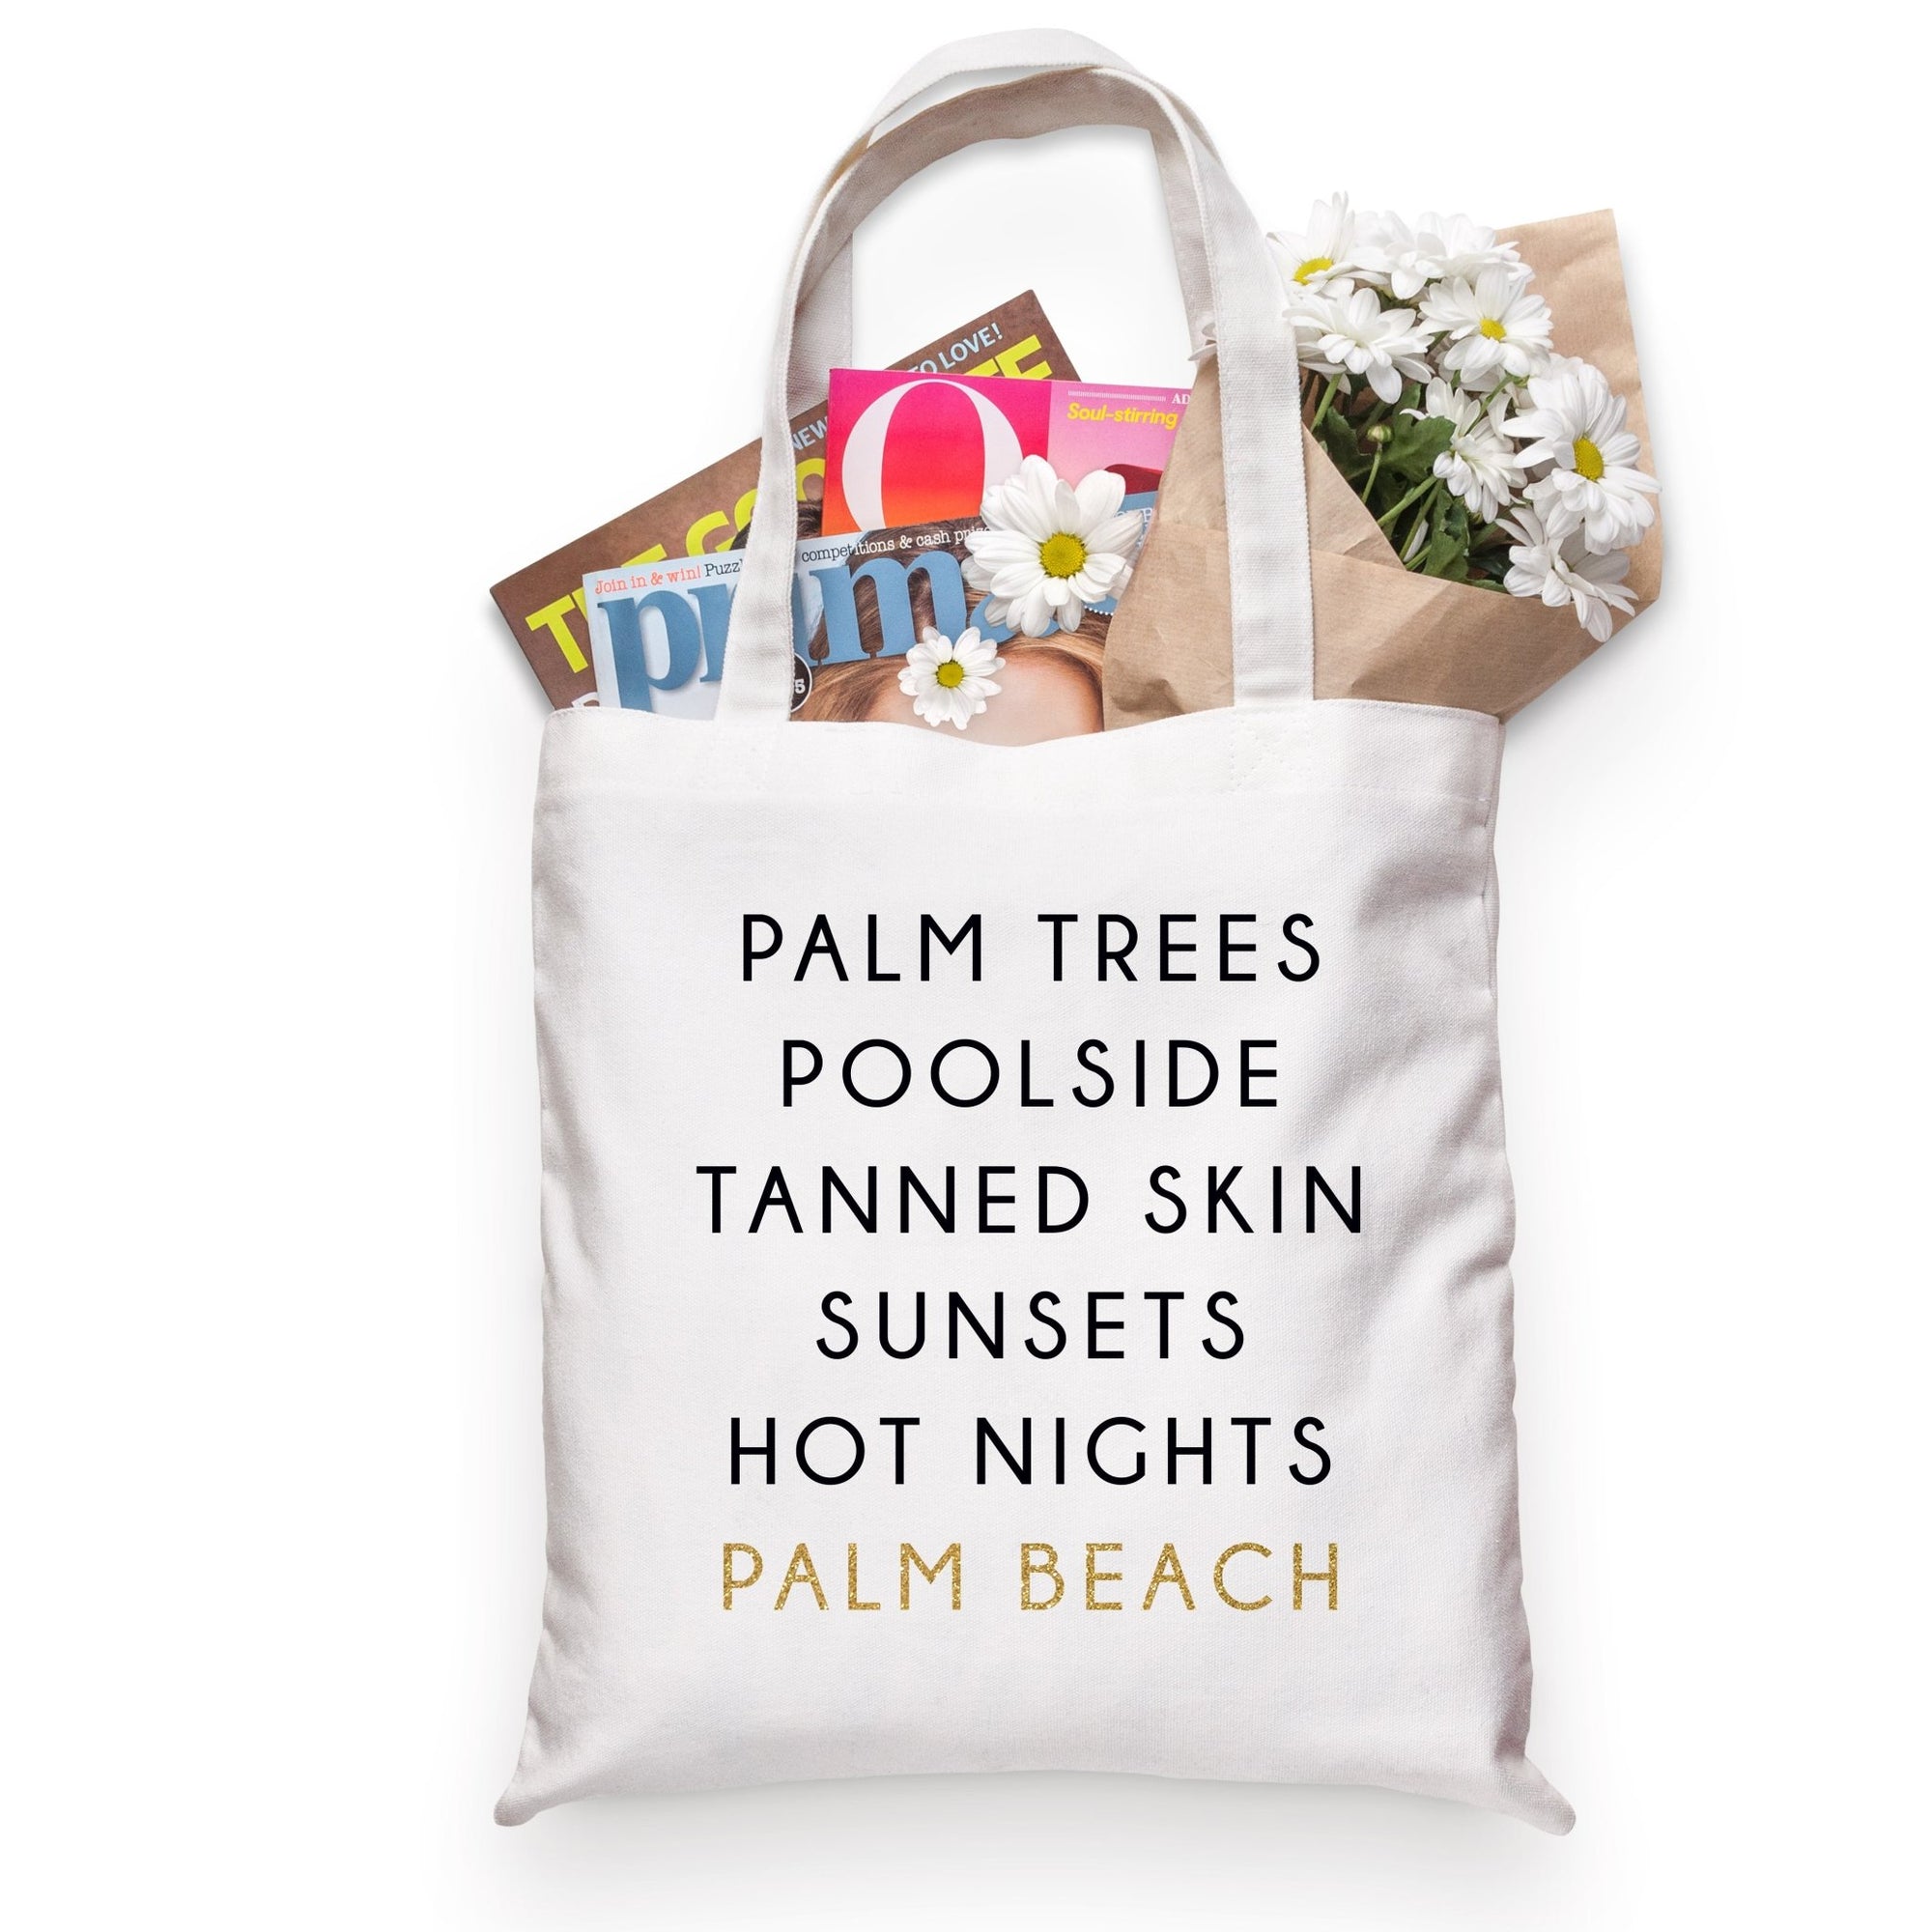 A cotton tote is customized with a black and gold Palm Beach design.